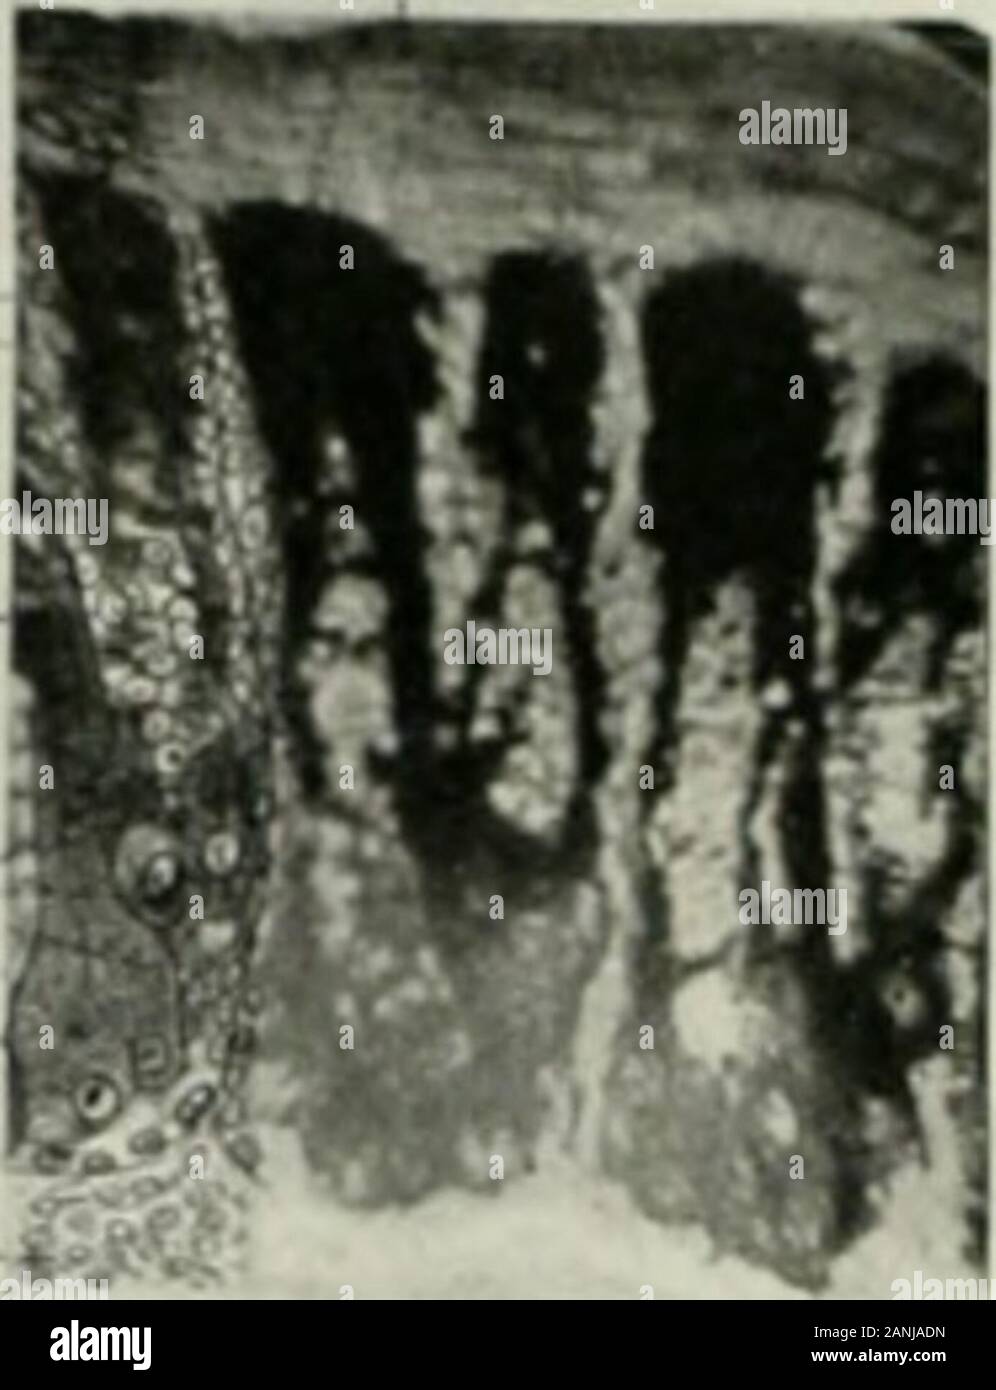 The anatomical record . ate cells differentiatinginto feather l&gt;arl)ules are shown with their cytoplasm packed with melaningranules received from mclanophorcs. .l the left, histological details have beenndihil with a pen. a camera lucitla being employed. (&gt;c. 10; obj. 1.9 mm. oilinuner.sion i Hausch A- Lombi. The picture was much reduced in publication.One barb-vane ridgi appears cotnplctcly, another at the left is almost all in thepicture, and a large portion of a third at the right is included. germ sections, according to Mrs. Knowlton. In all cases thepigmented inner .sheath cells we Stock Photo